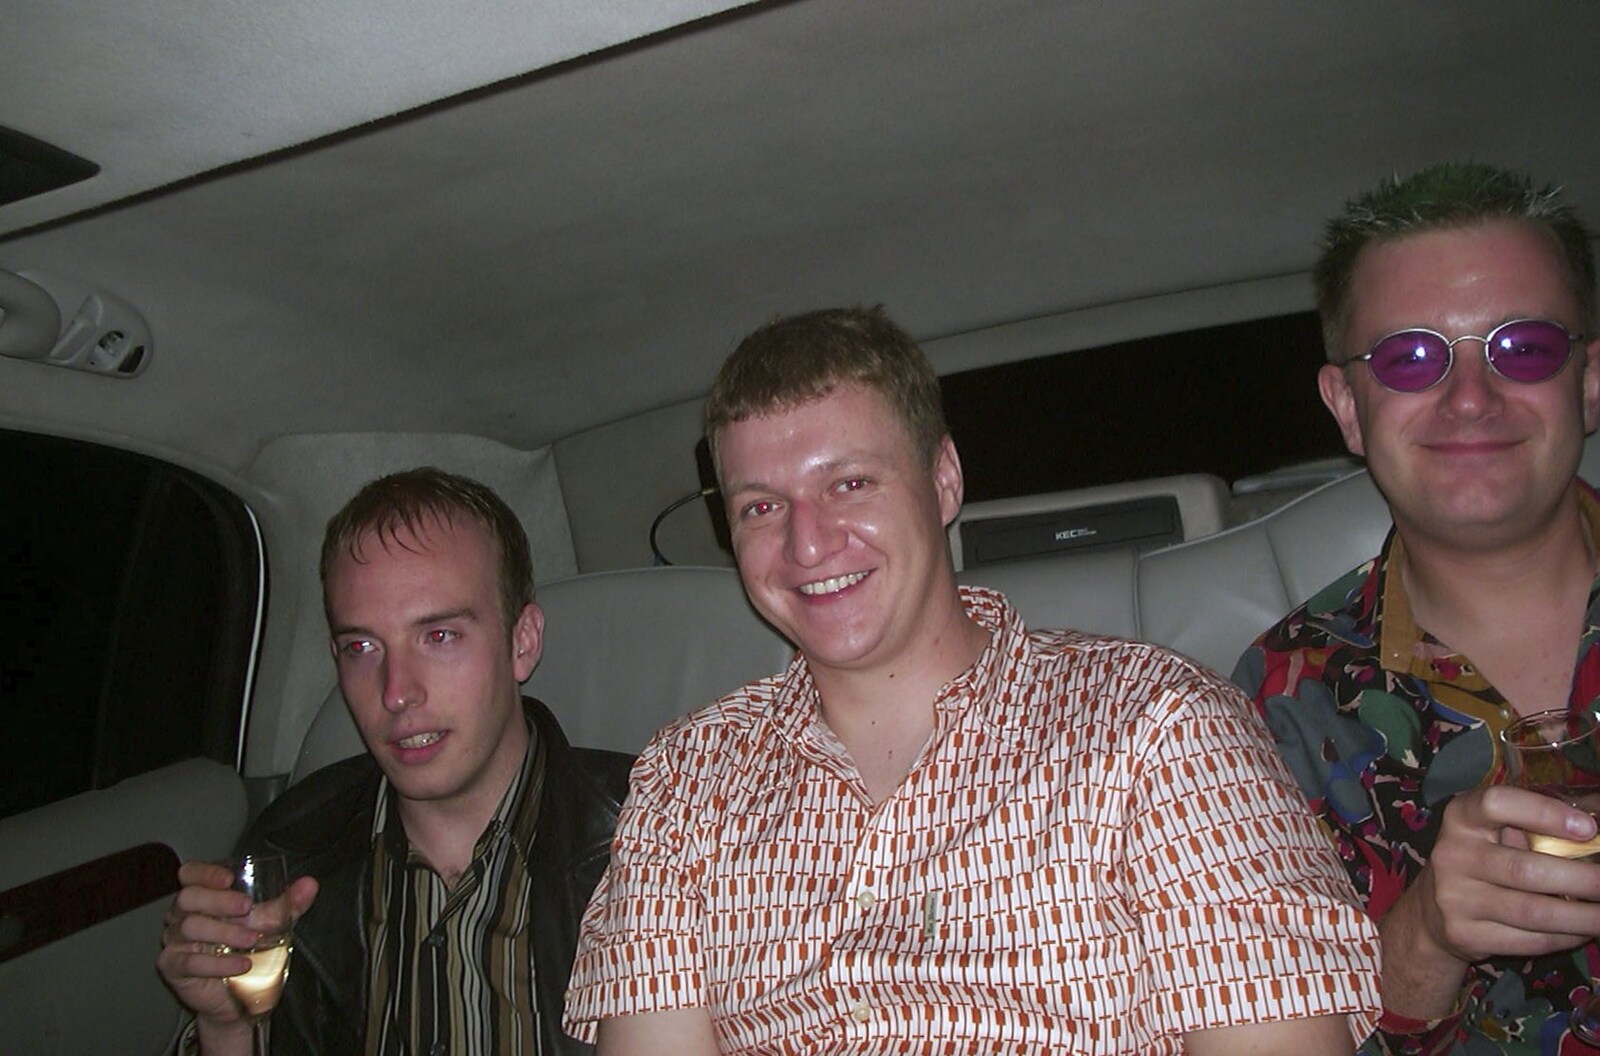 Unknown, Adrian 'Dogs' and Nosher from 3G Lab's Carwash Nightclub by Limo, London - 27th April 2002